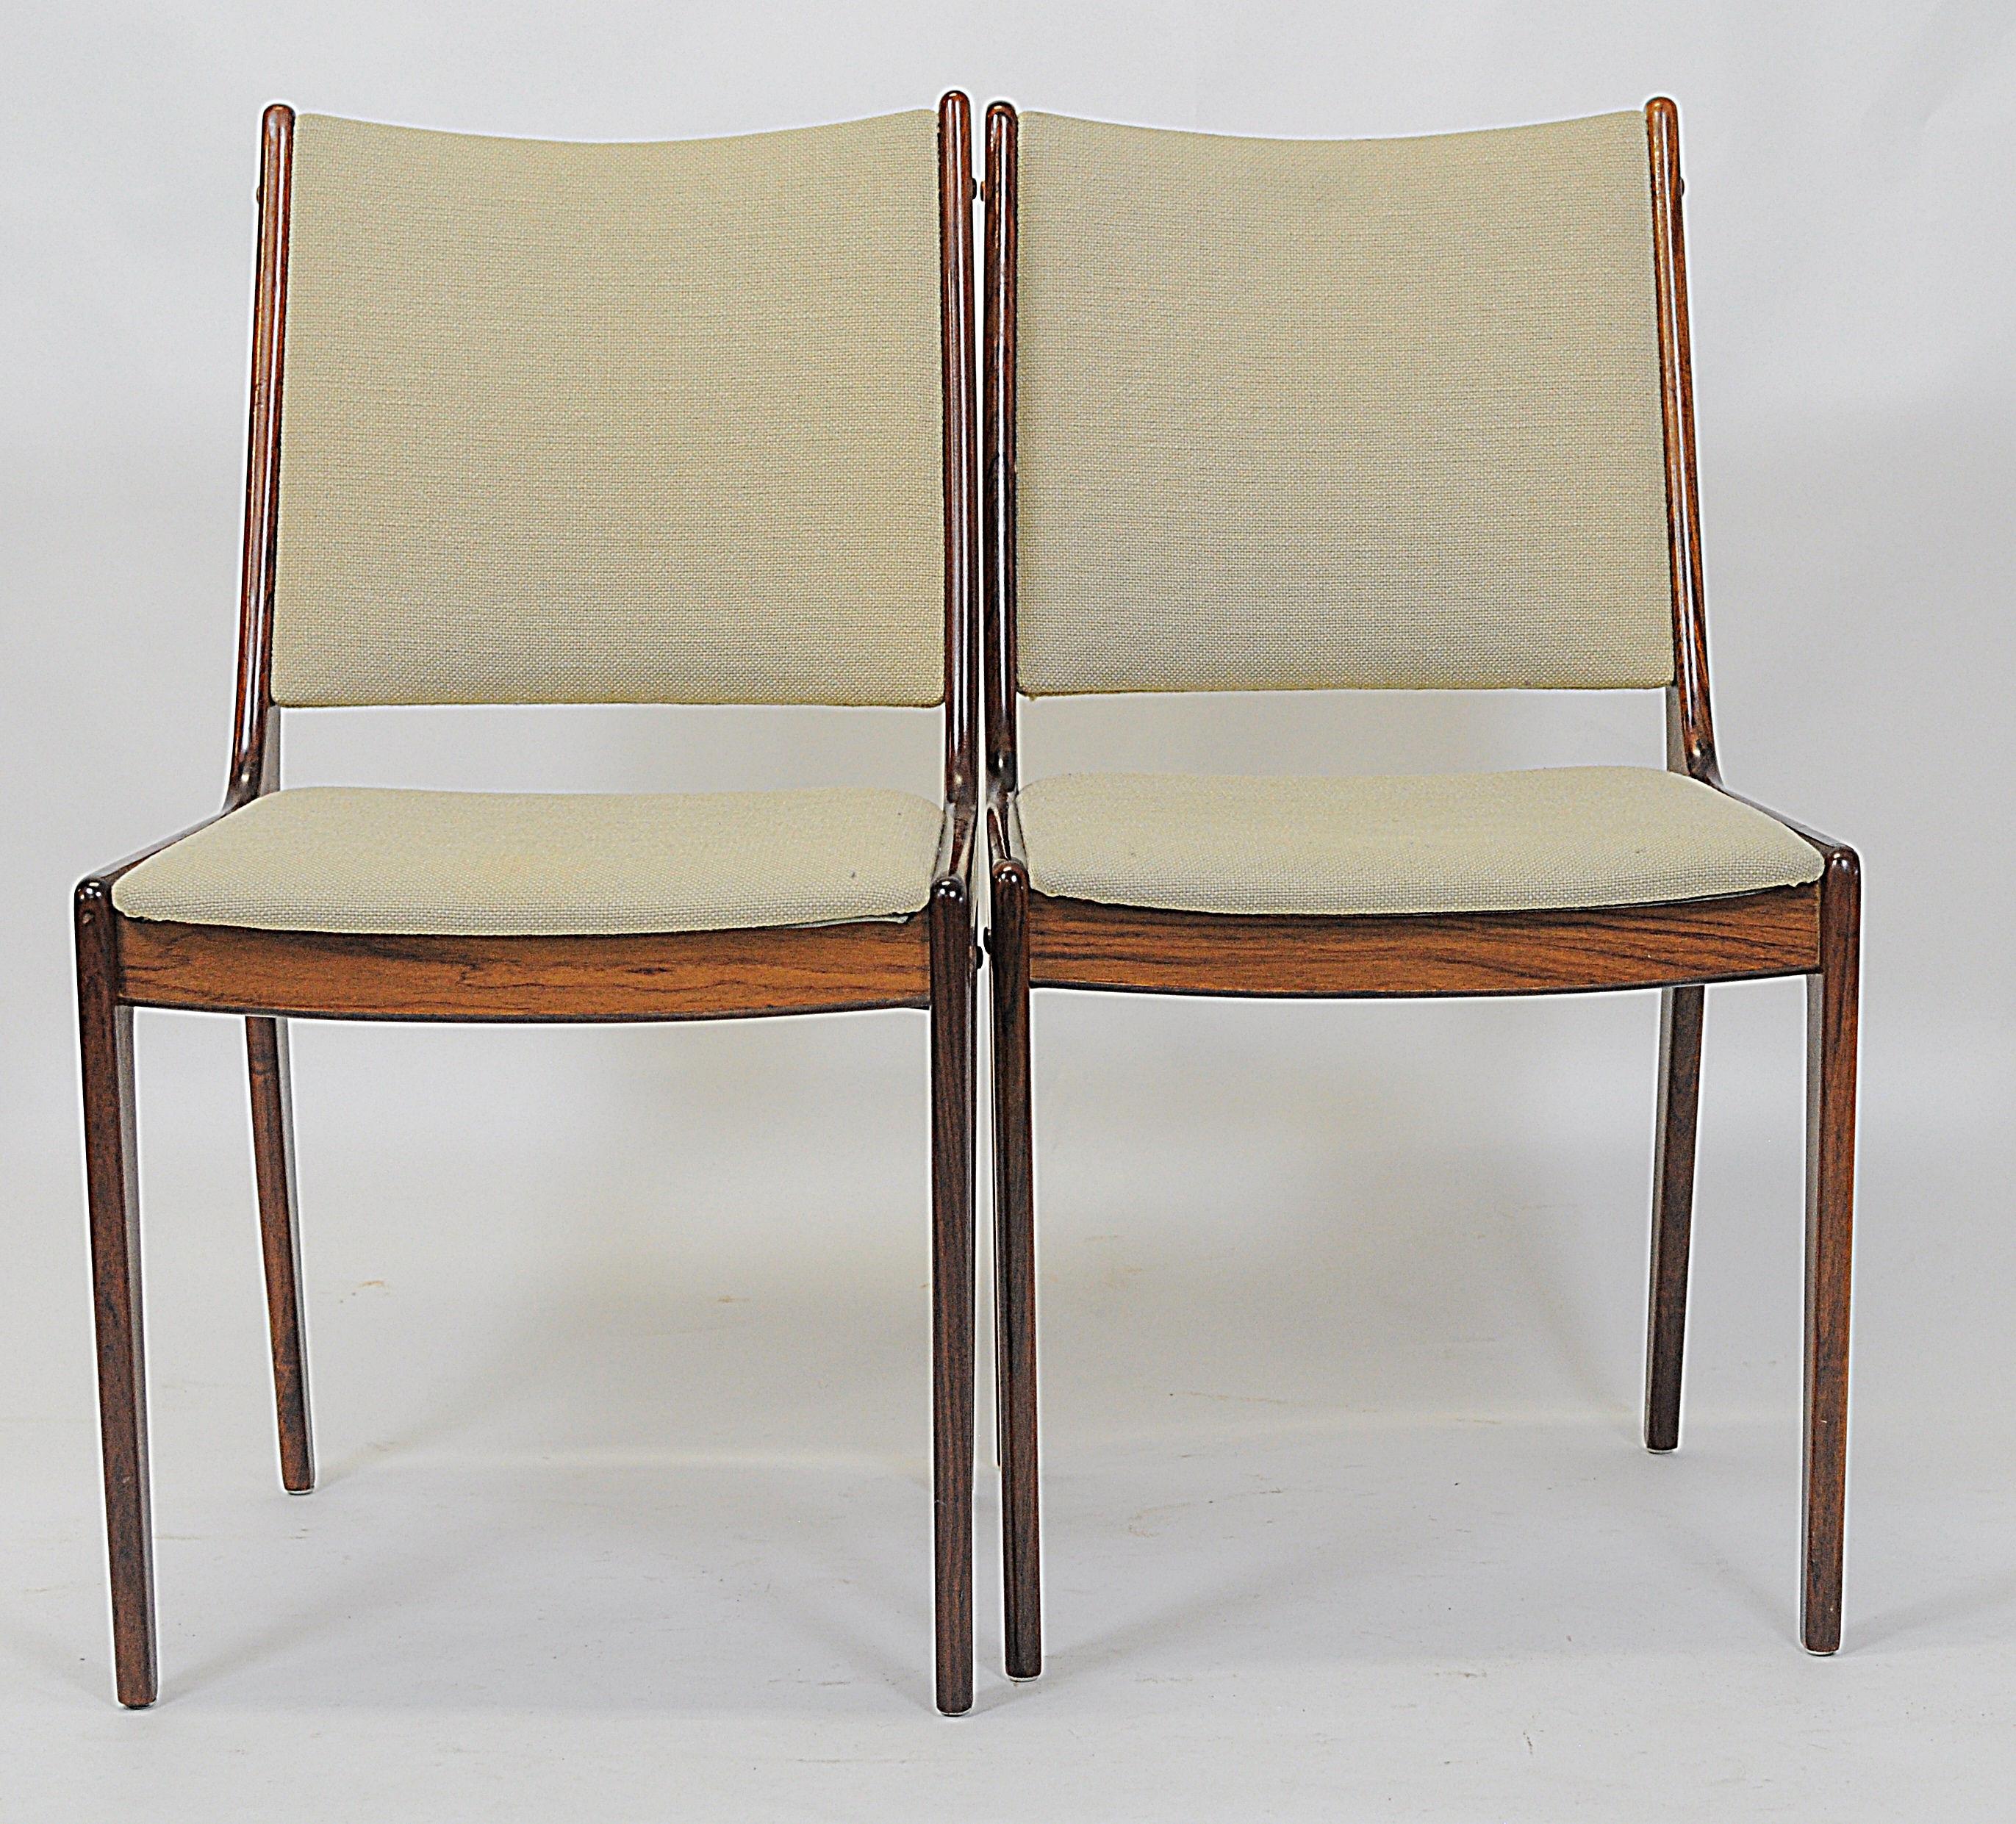 Set of 8 1960s Johannes Andersen dining chairs in rosewood made by Uldum Møbler, Denmark.

The set of dining chairs feature a clean simple yet elegant design that will fit in well in most houses. 

The chairs have been fully restored and refinished